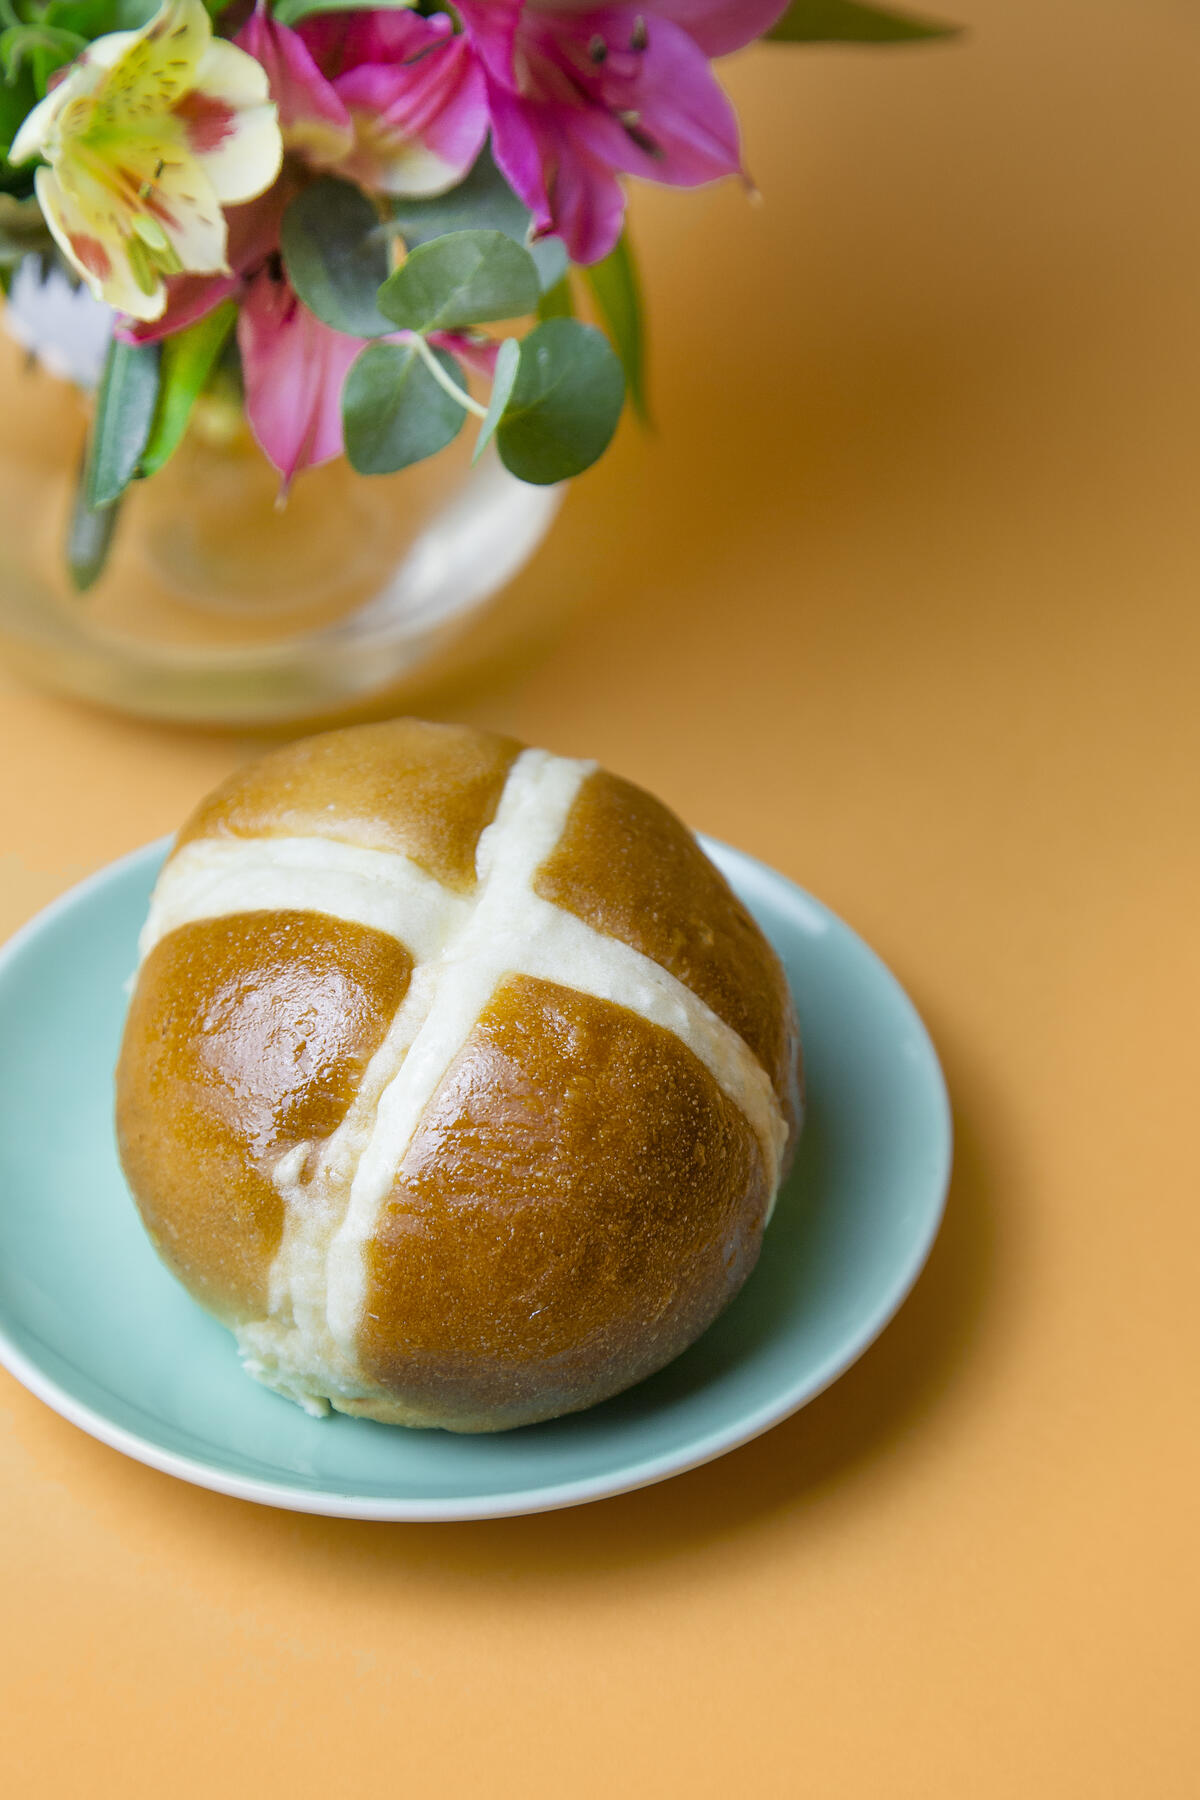 The recipe for Easter Hot Cross Buns